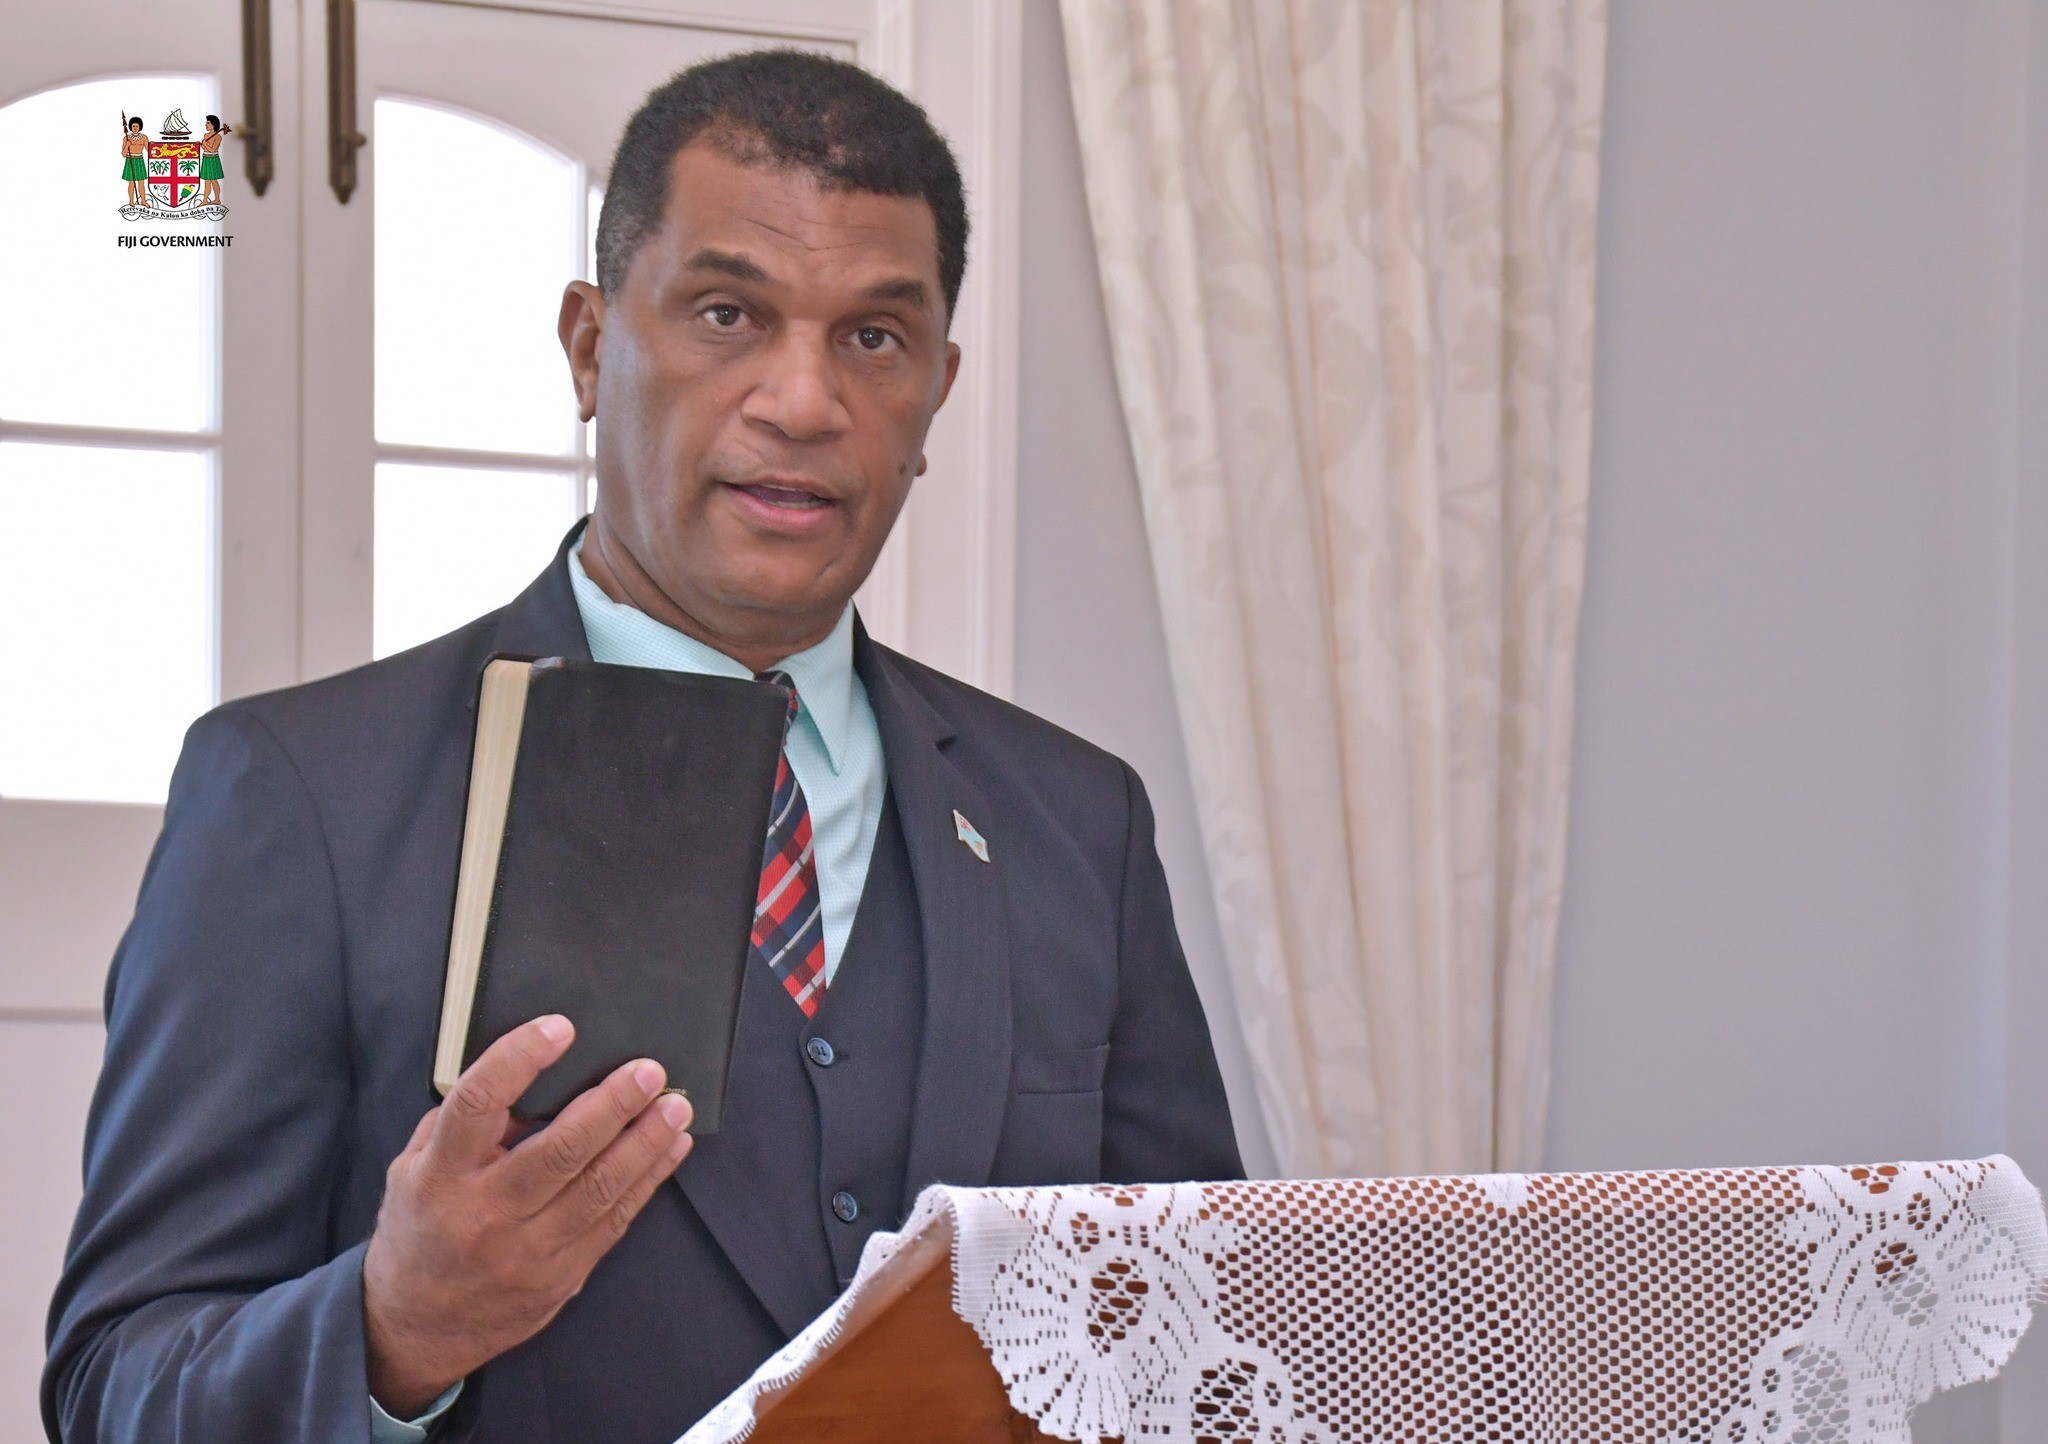 Surprise second chance for  disgraced Fiji MP Radrodro